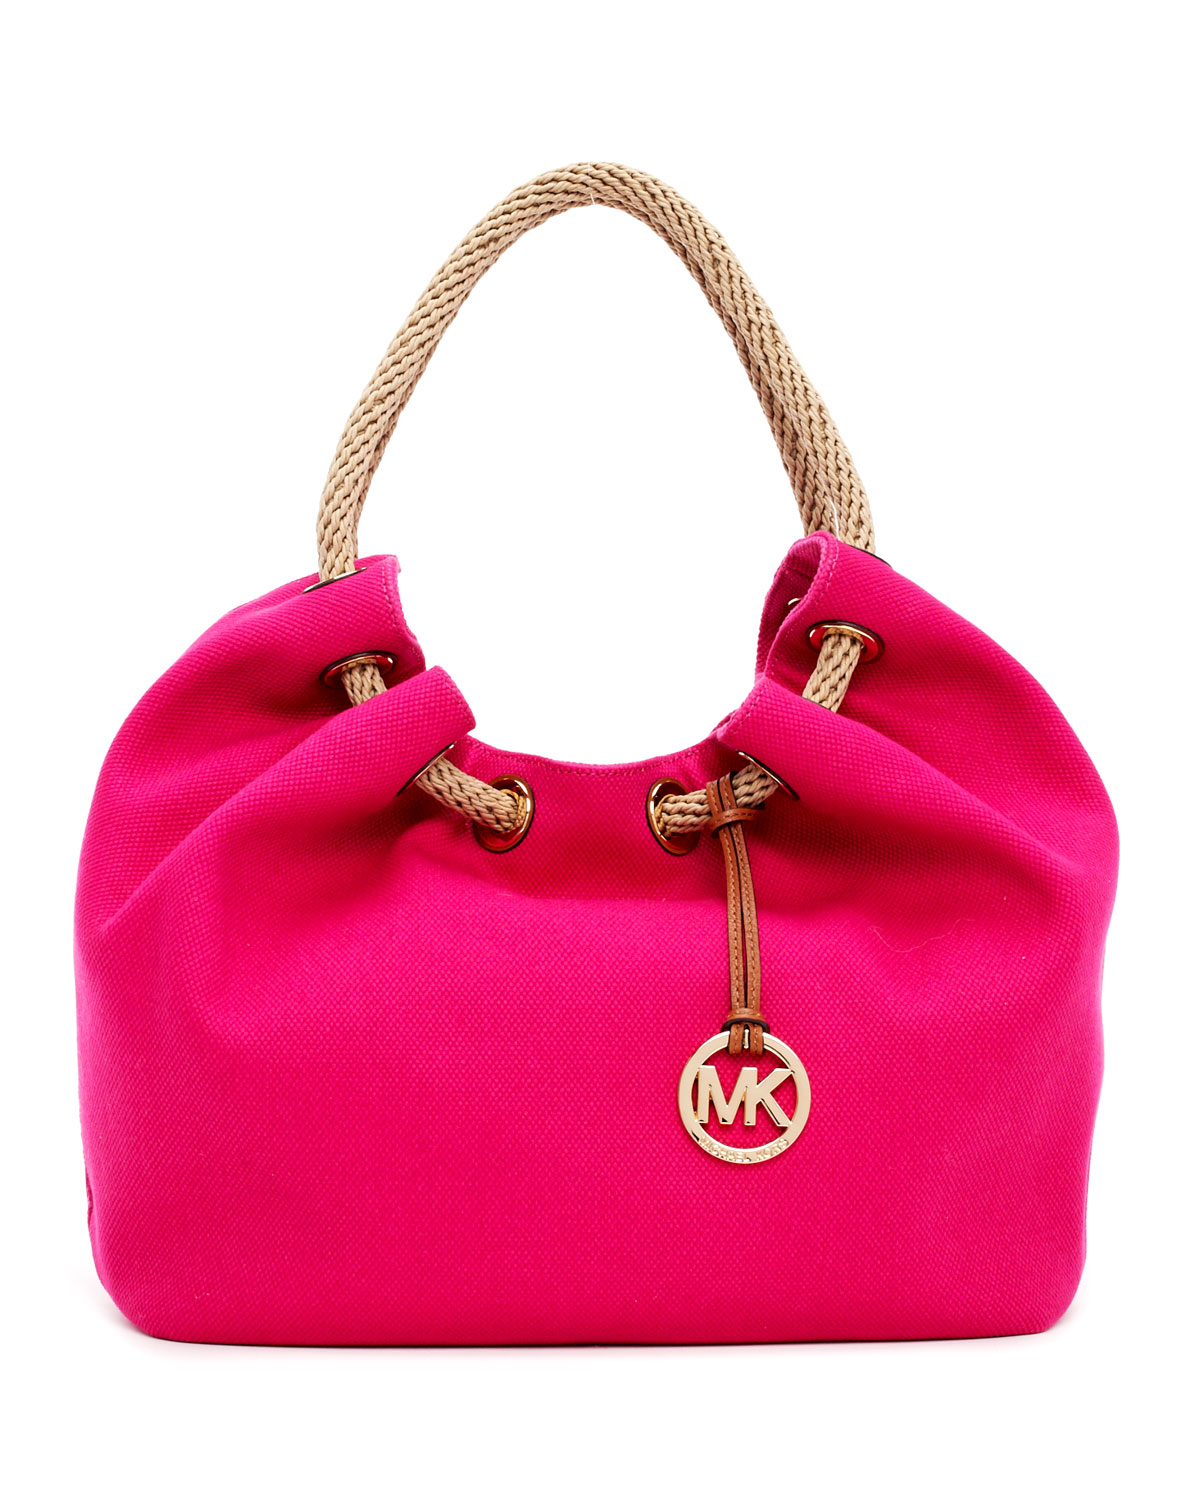 Michael michael kors Large Marina Canvas Shoulder Tote Bag in Purple (electric pink) | Lyst